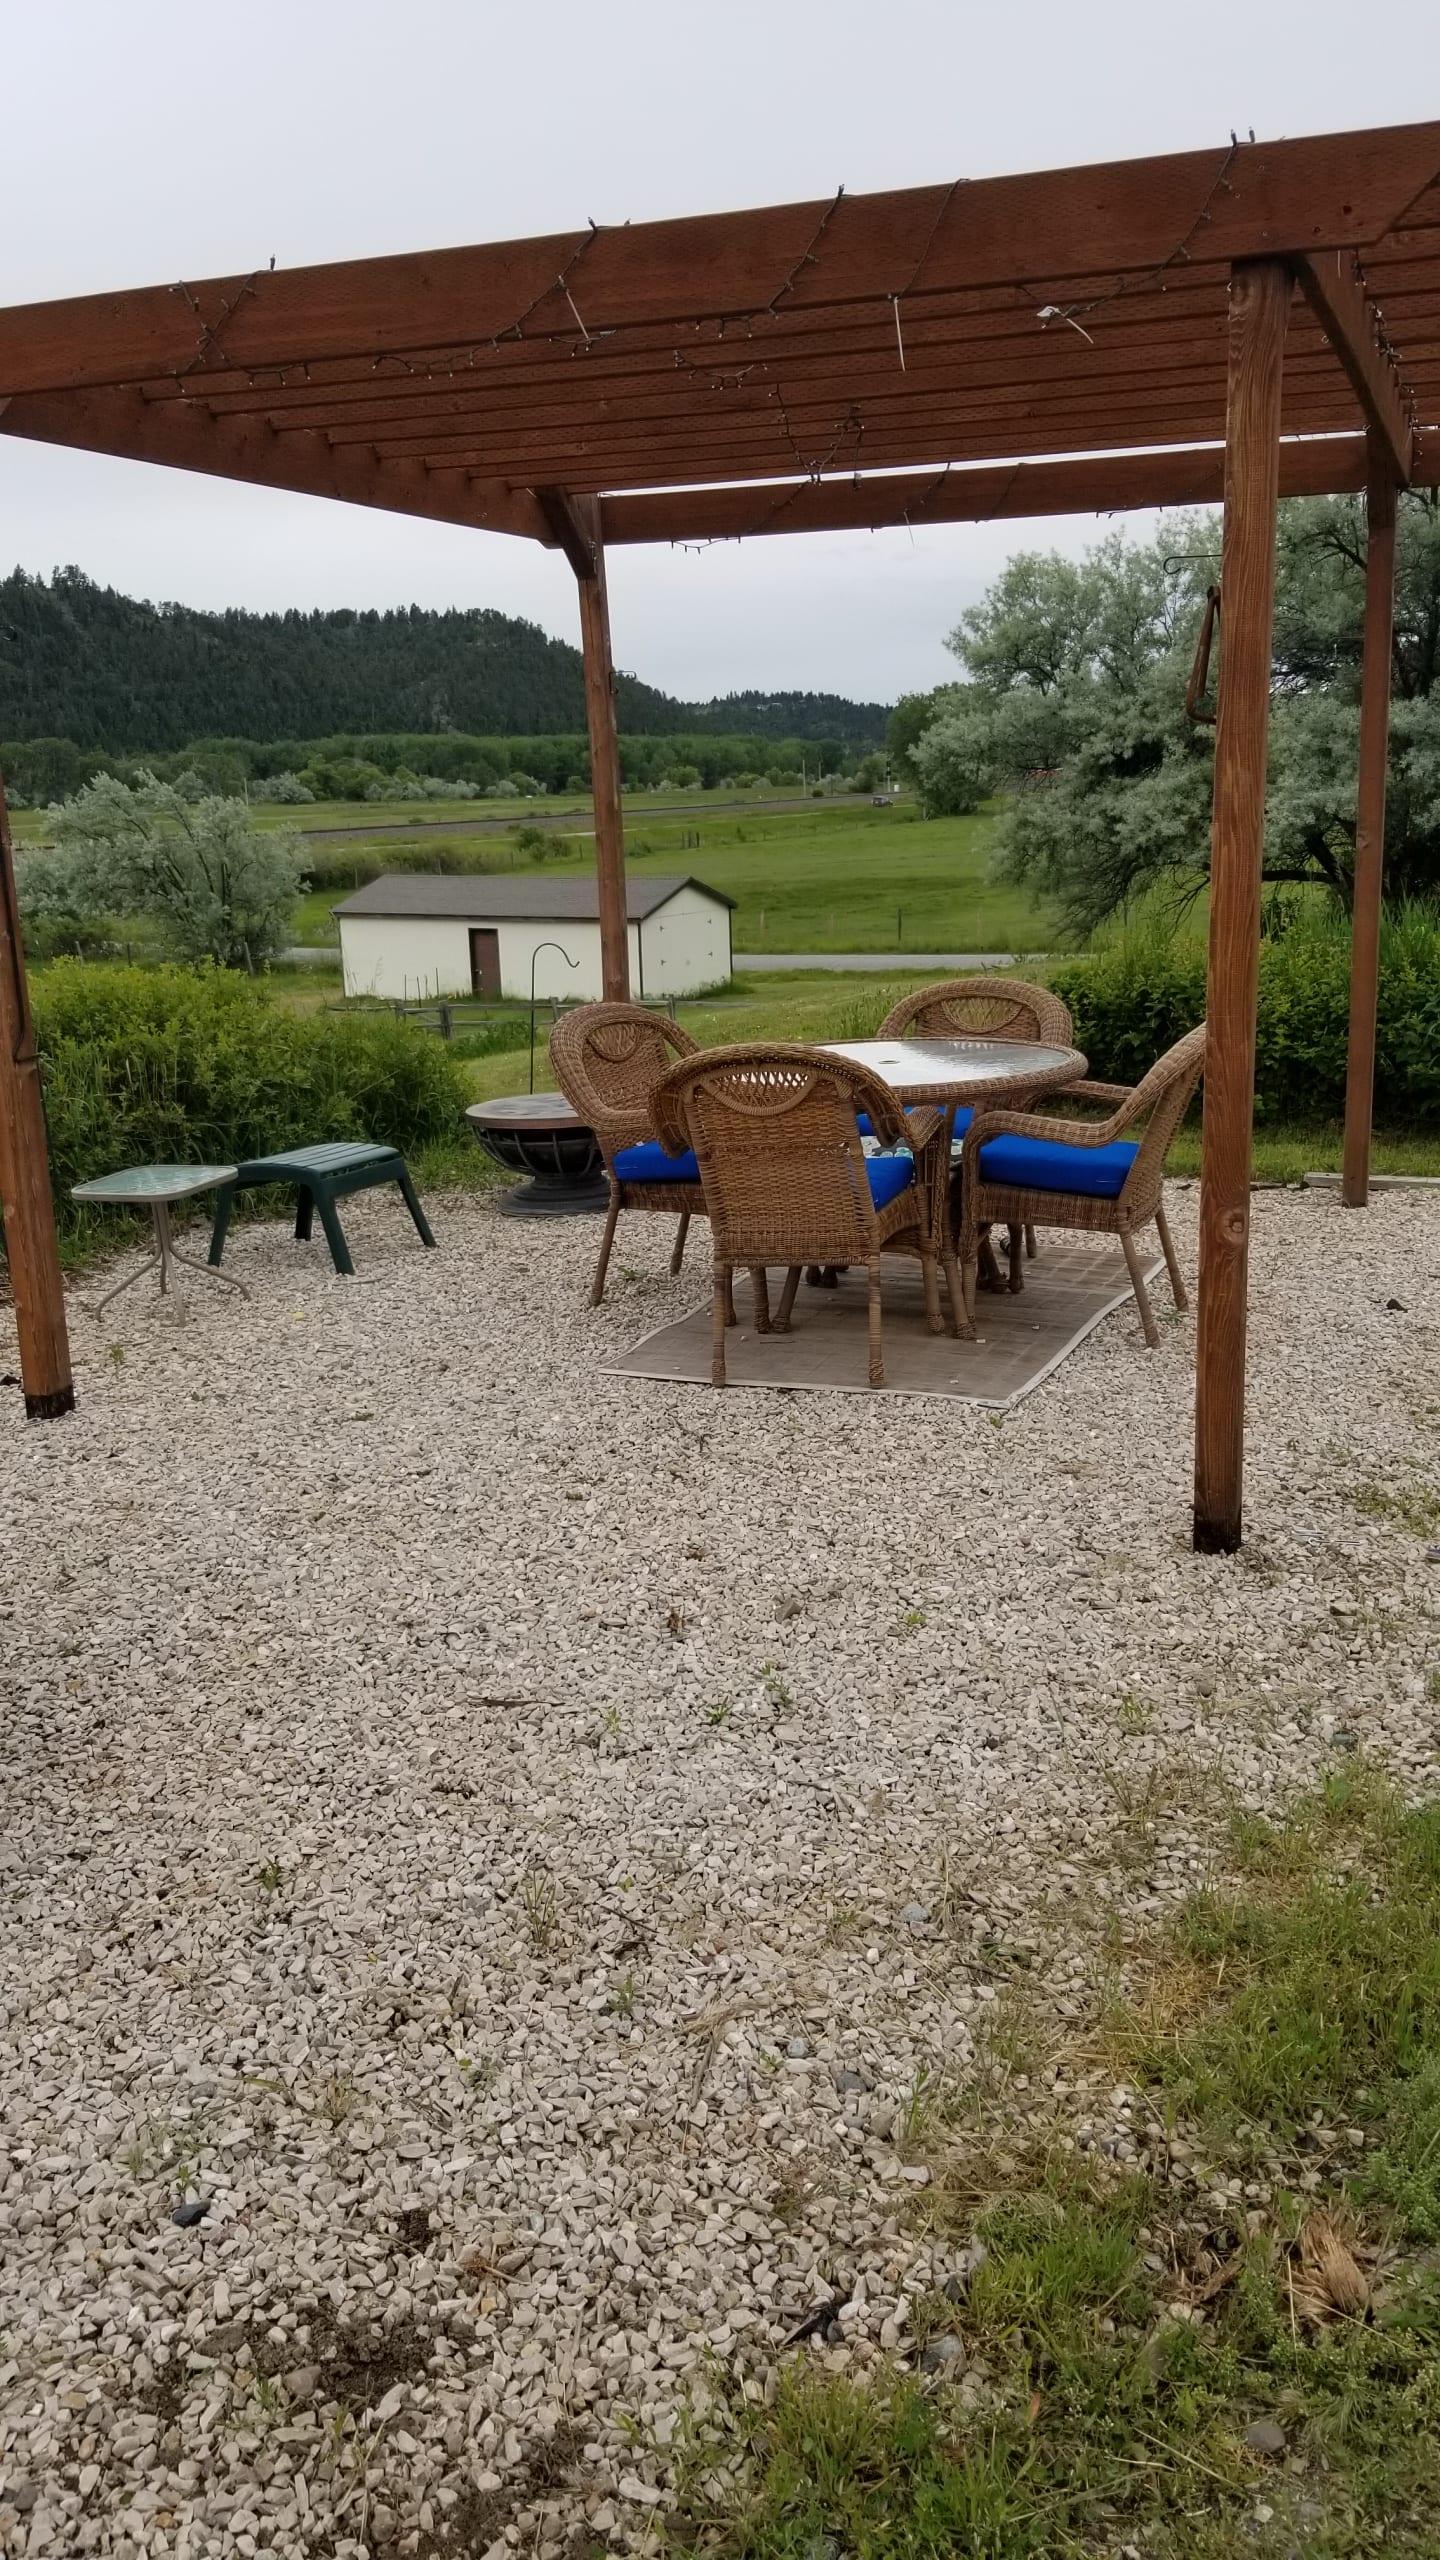 Pergula area with table and chairs available.